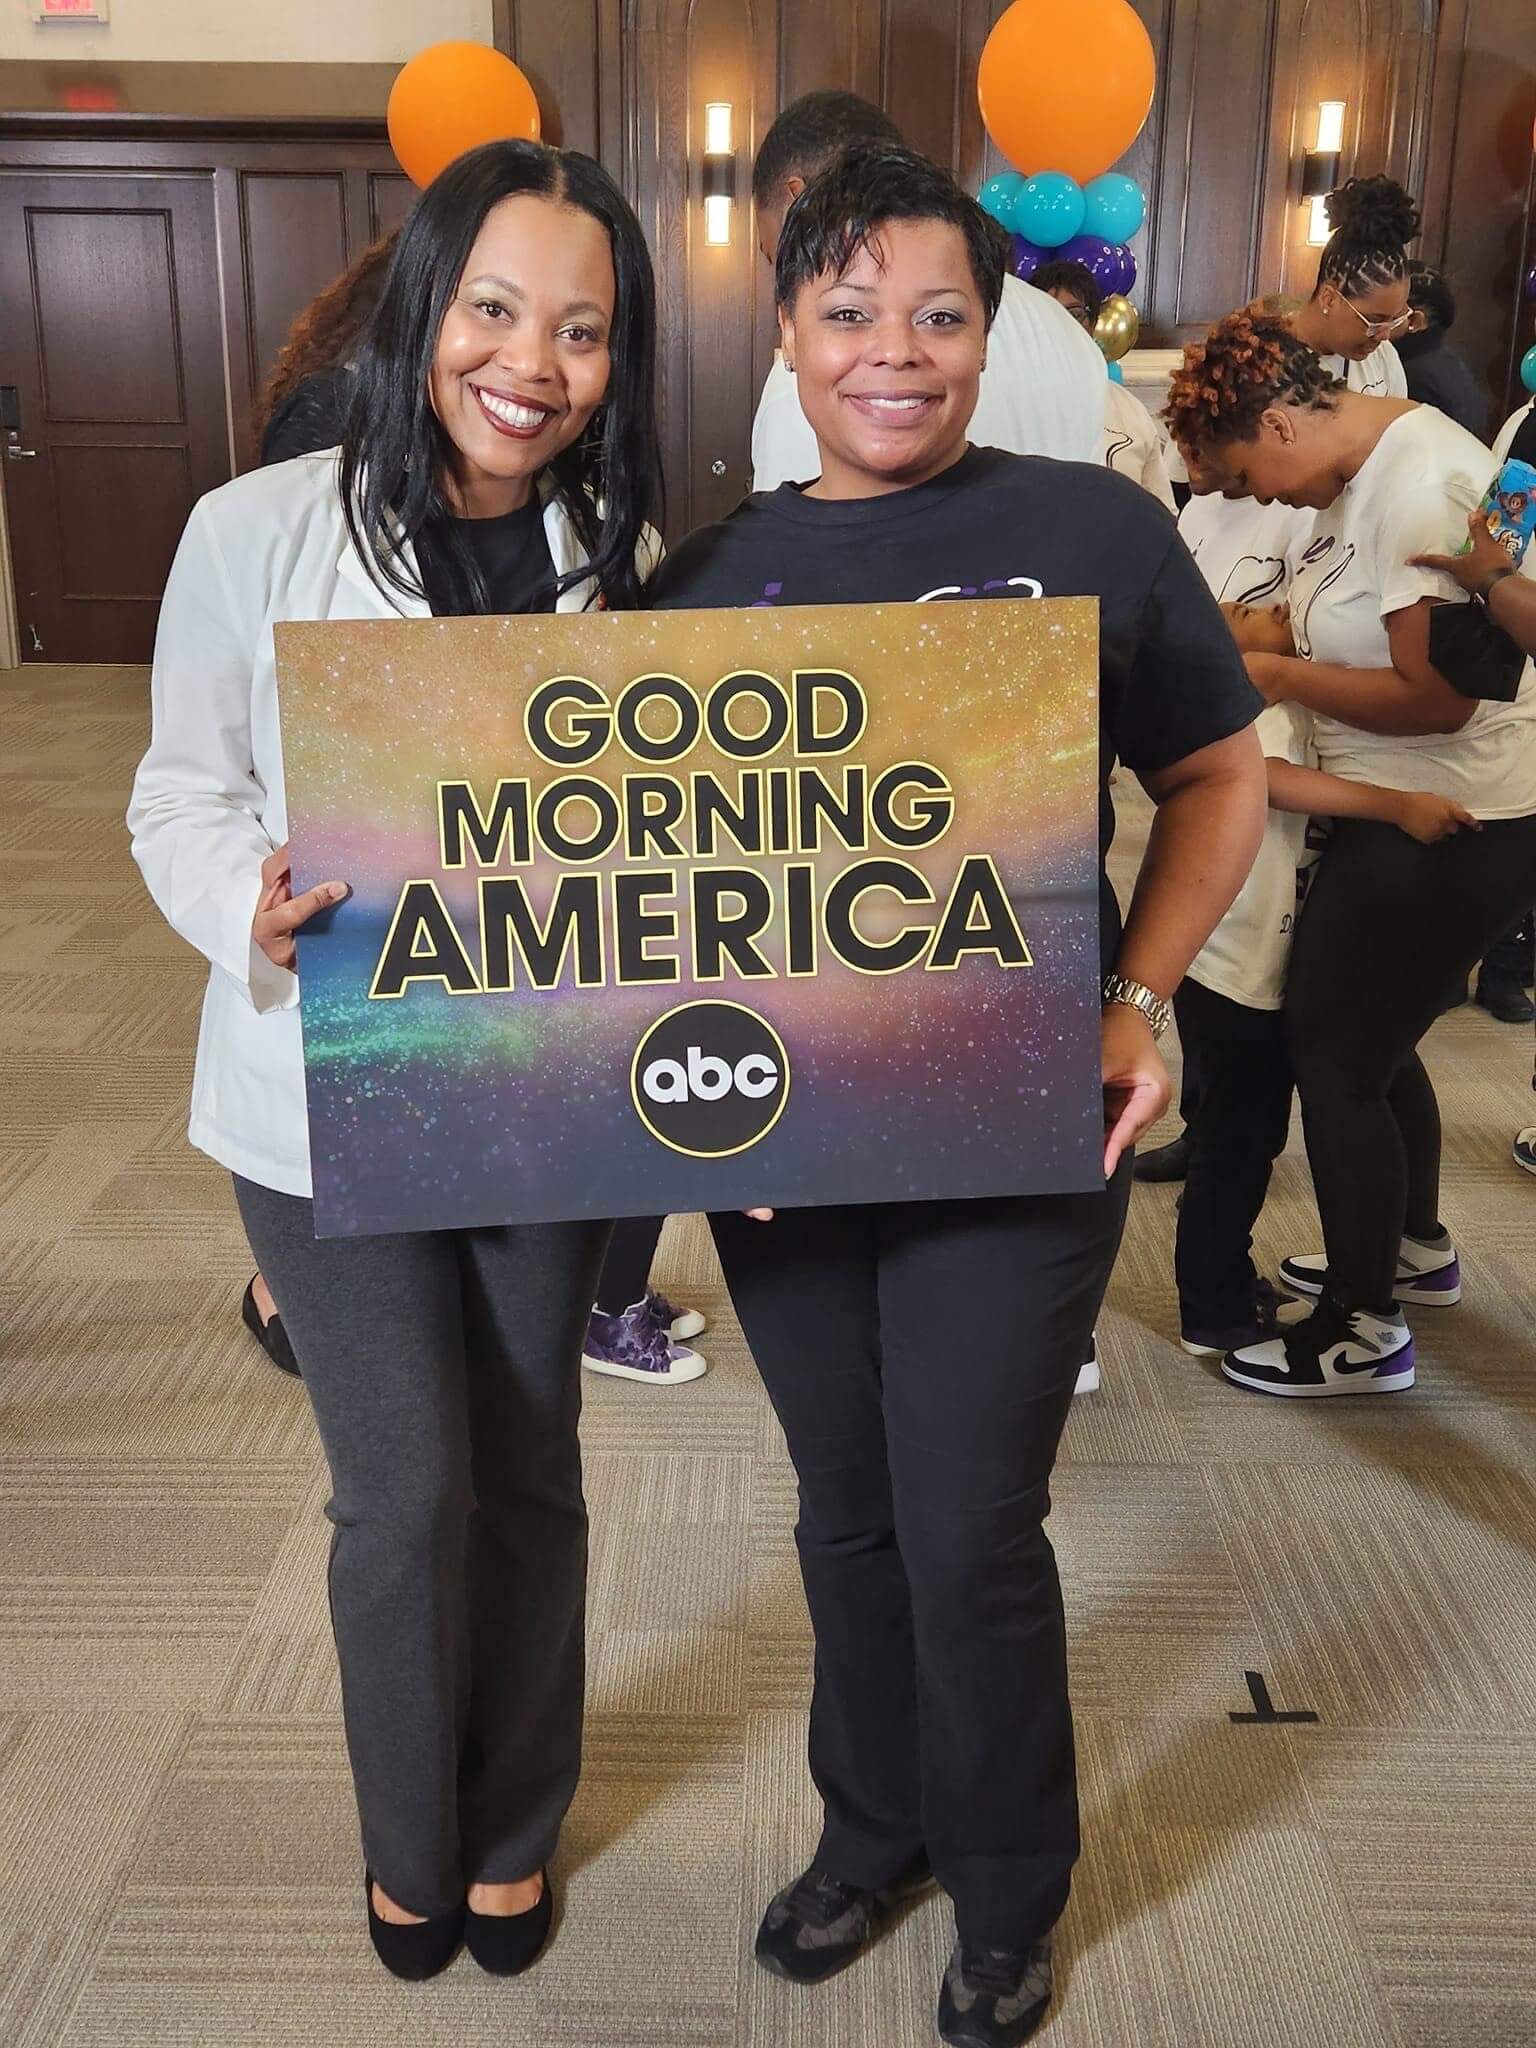 Two men holding a Good Morning America sign.